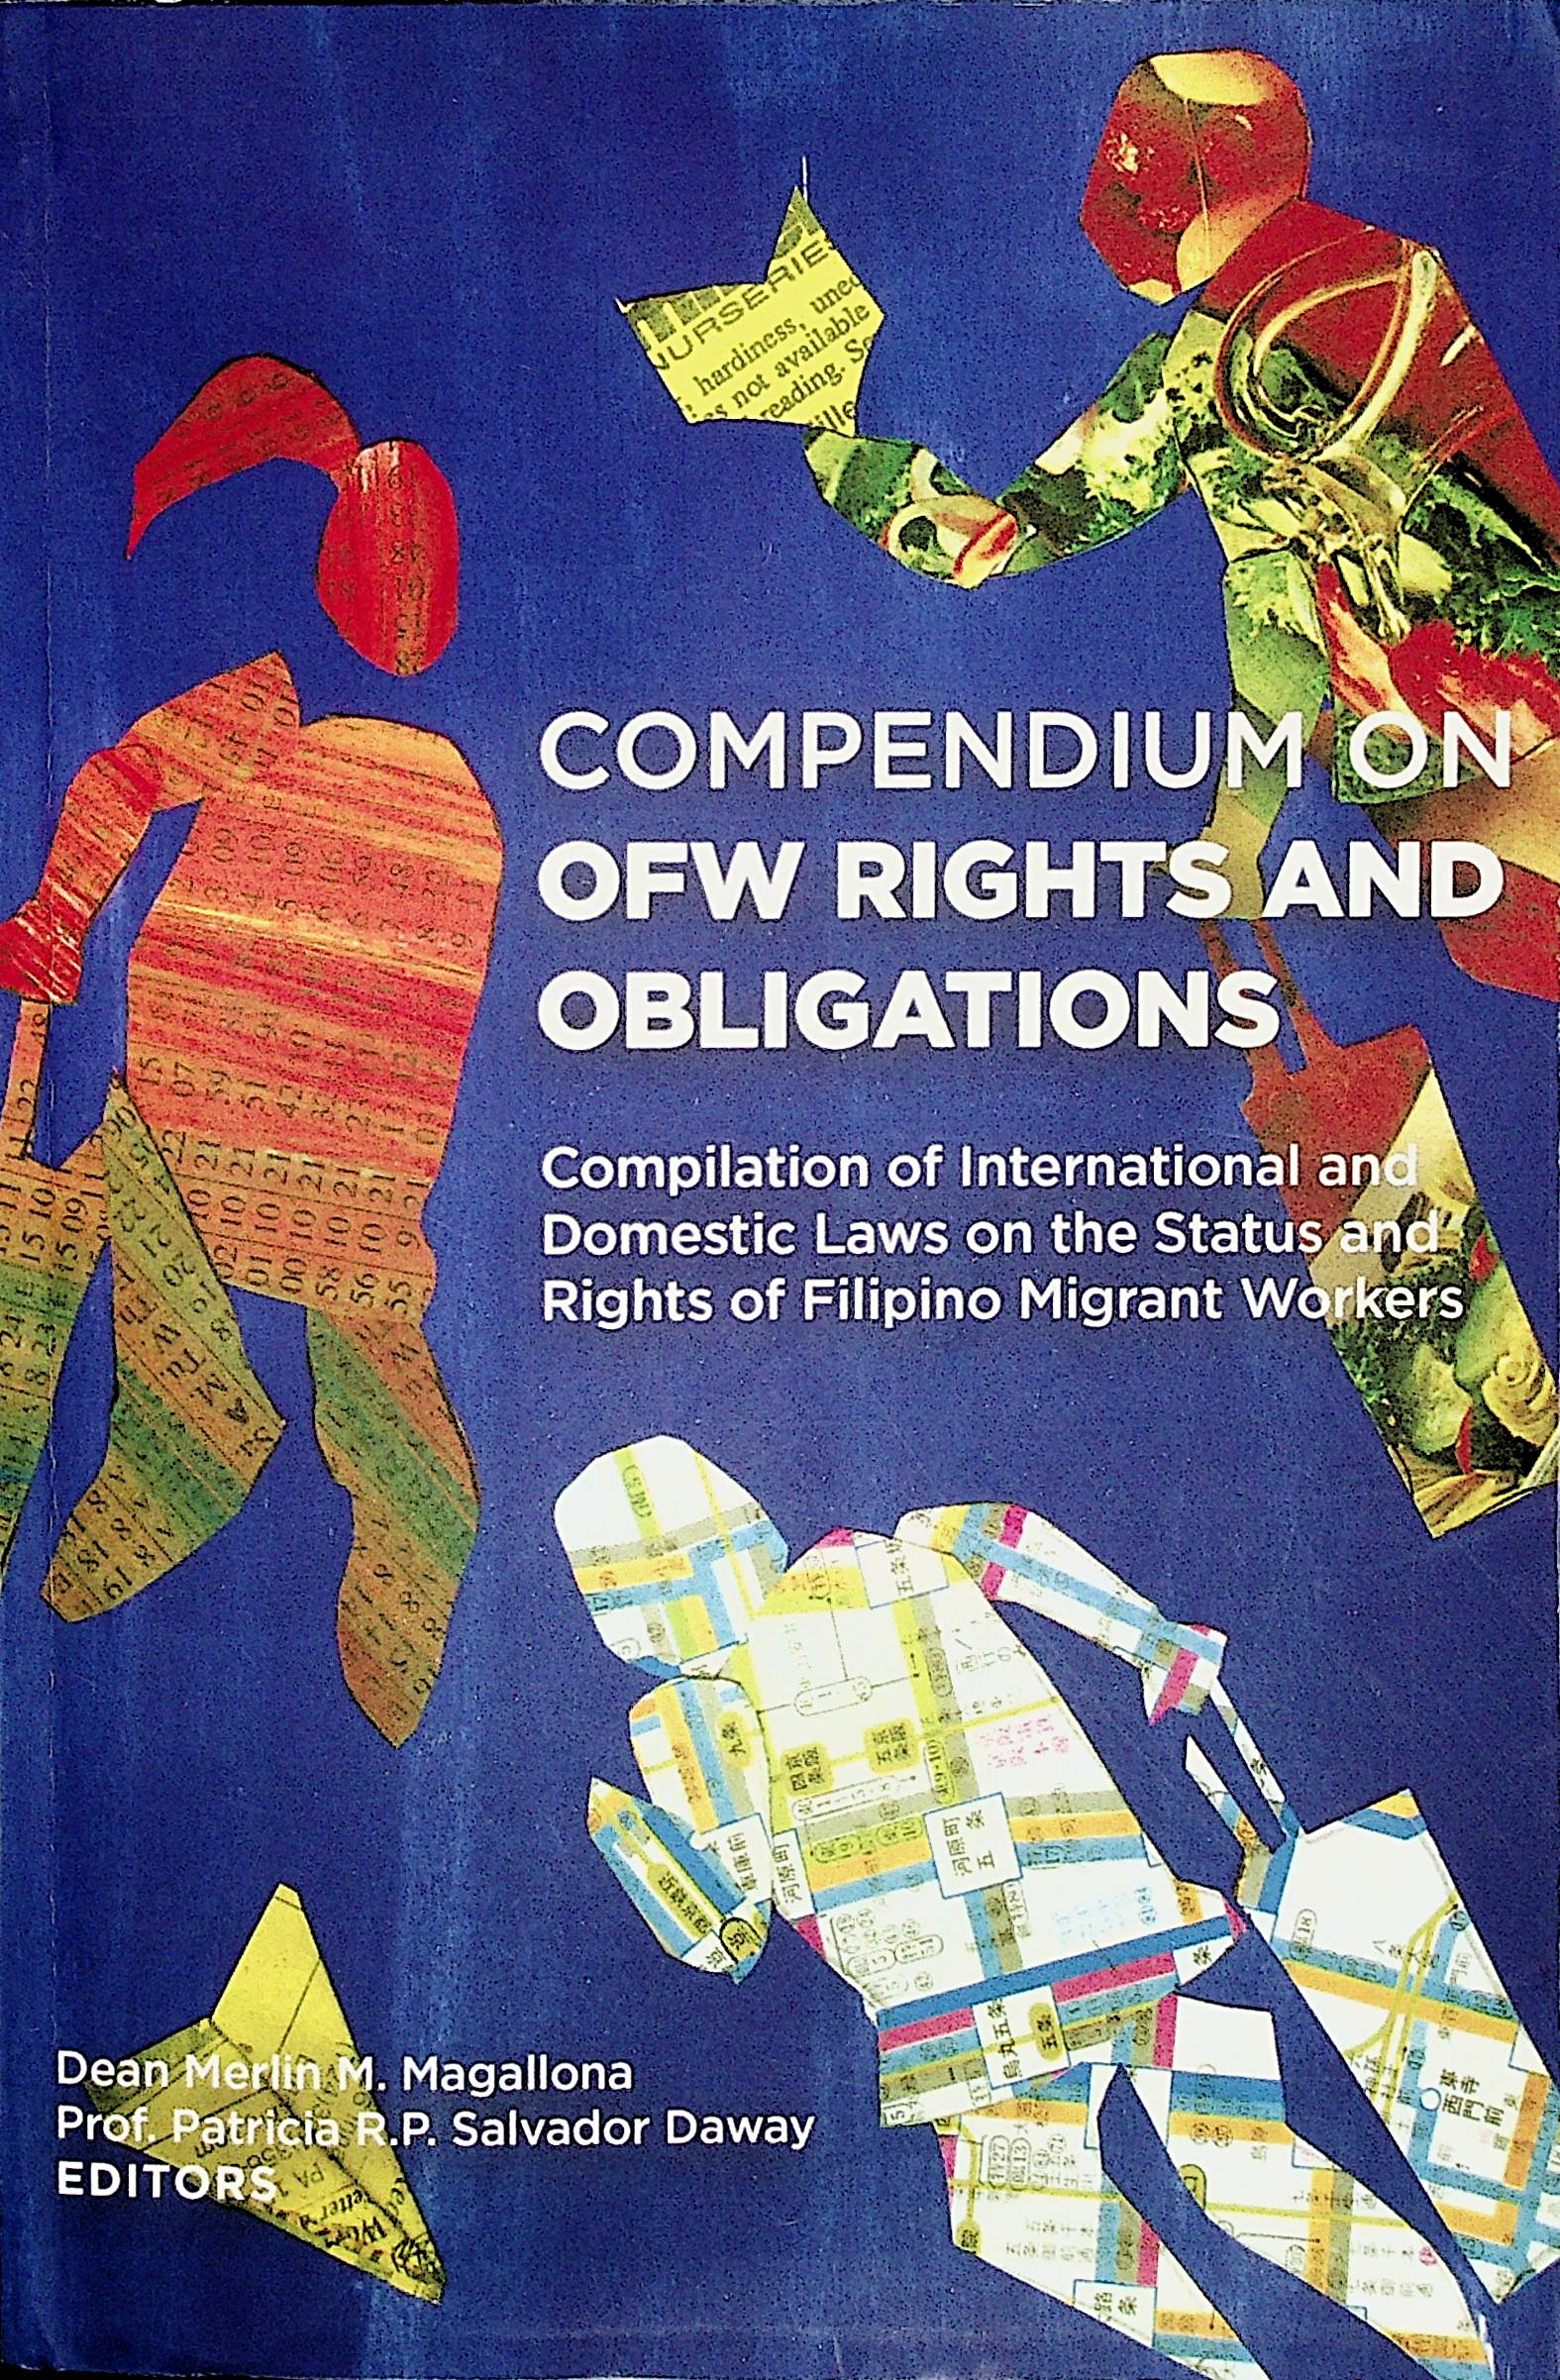 Compendium on OFW rights and obligations compilation of international and domestic laws on the status and rights of Filipino migrant workers